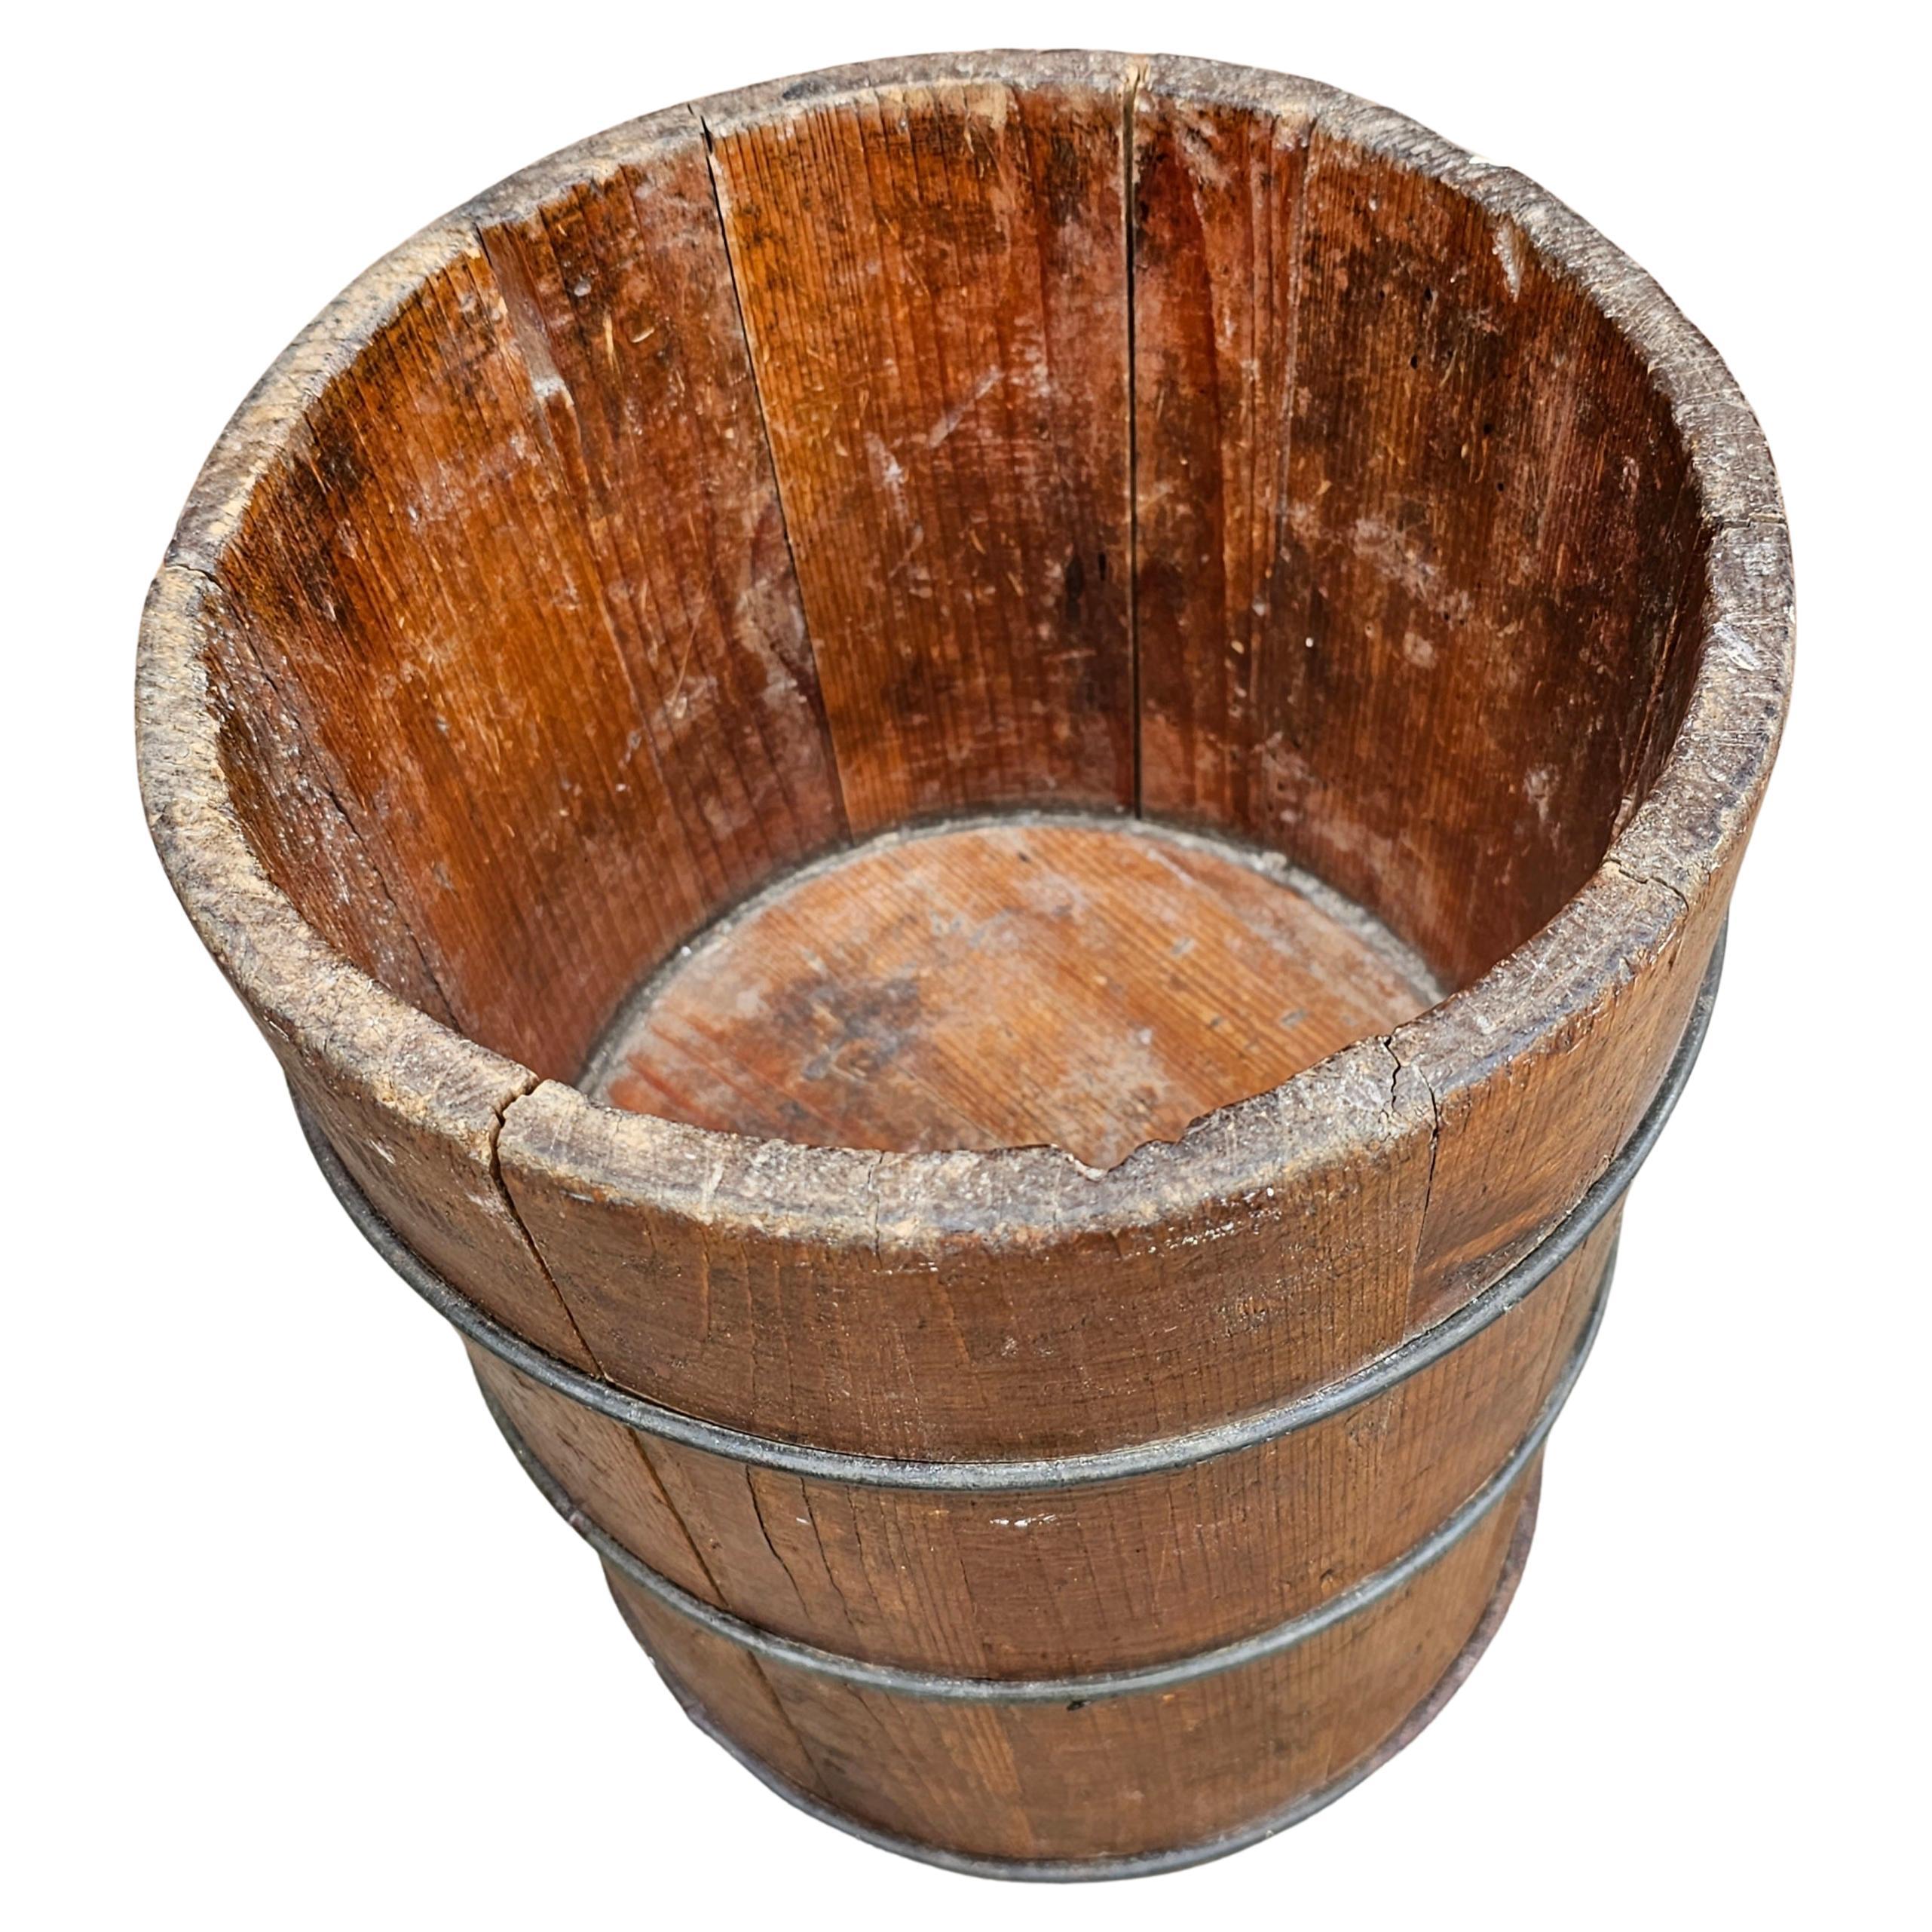 A 19th Century Handcrafted Turned Wooden bail bucket, Nowadays used as a Planter. Truly one of a kind piece to bring originality and visibility to you plant. Measures 8.75